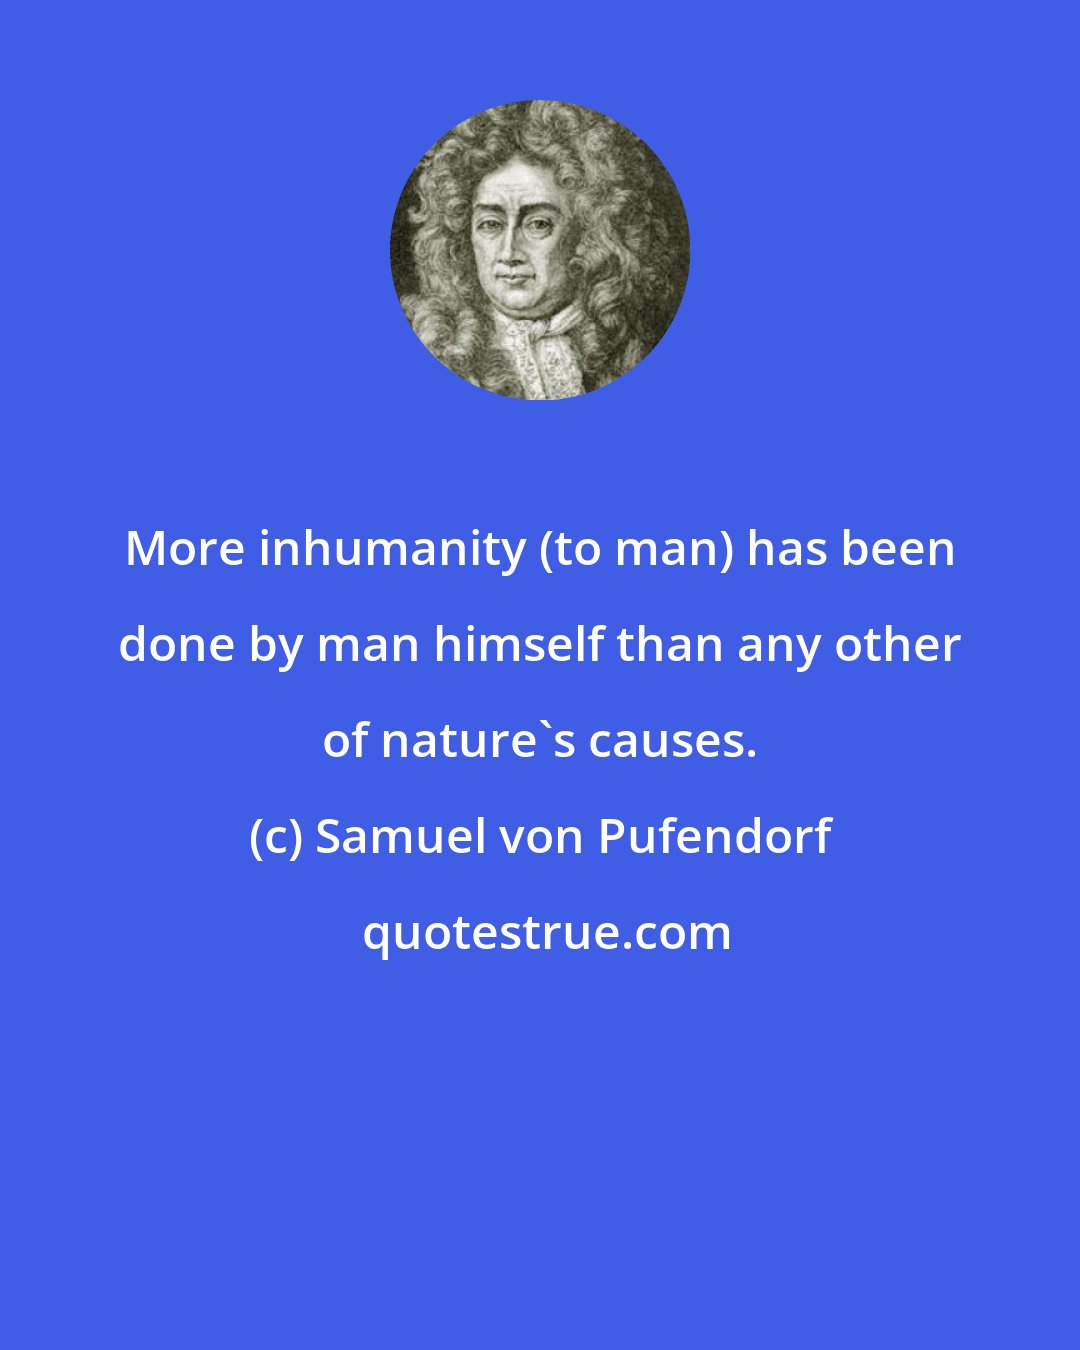 Samuel von Pufendorf: More inhumanity (to man) has been done by man himself than any other of nature's causes.